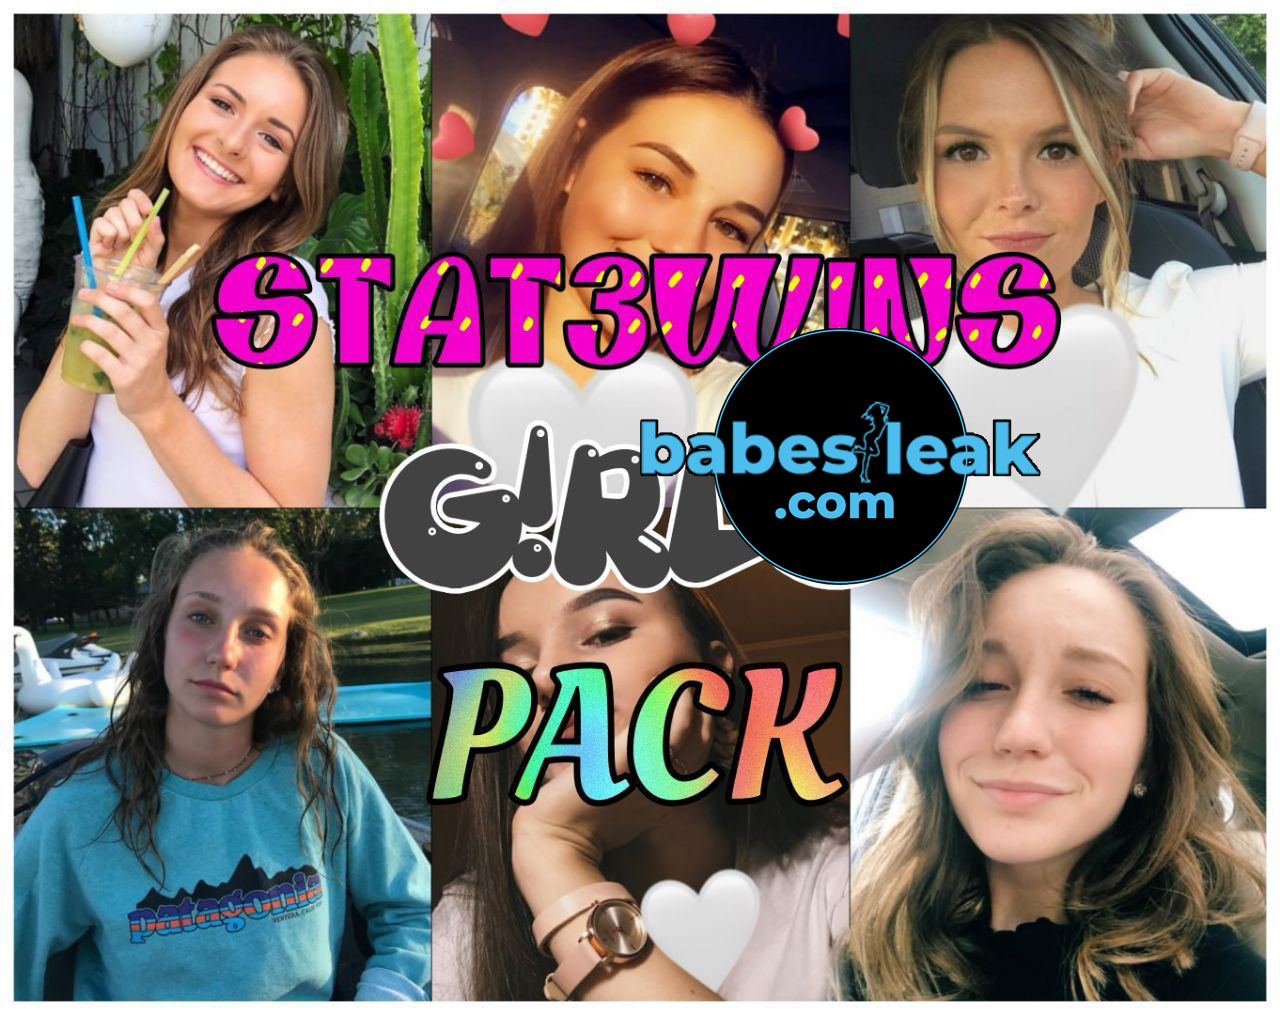 Premium 10 Statewins Girls Pack Stw060 Onlyfans Leaks Snapchat Leaks Statewins Leaks 8821